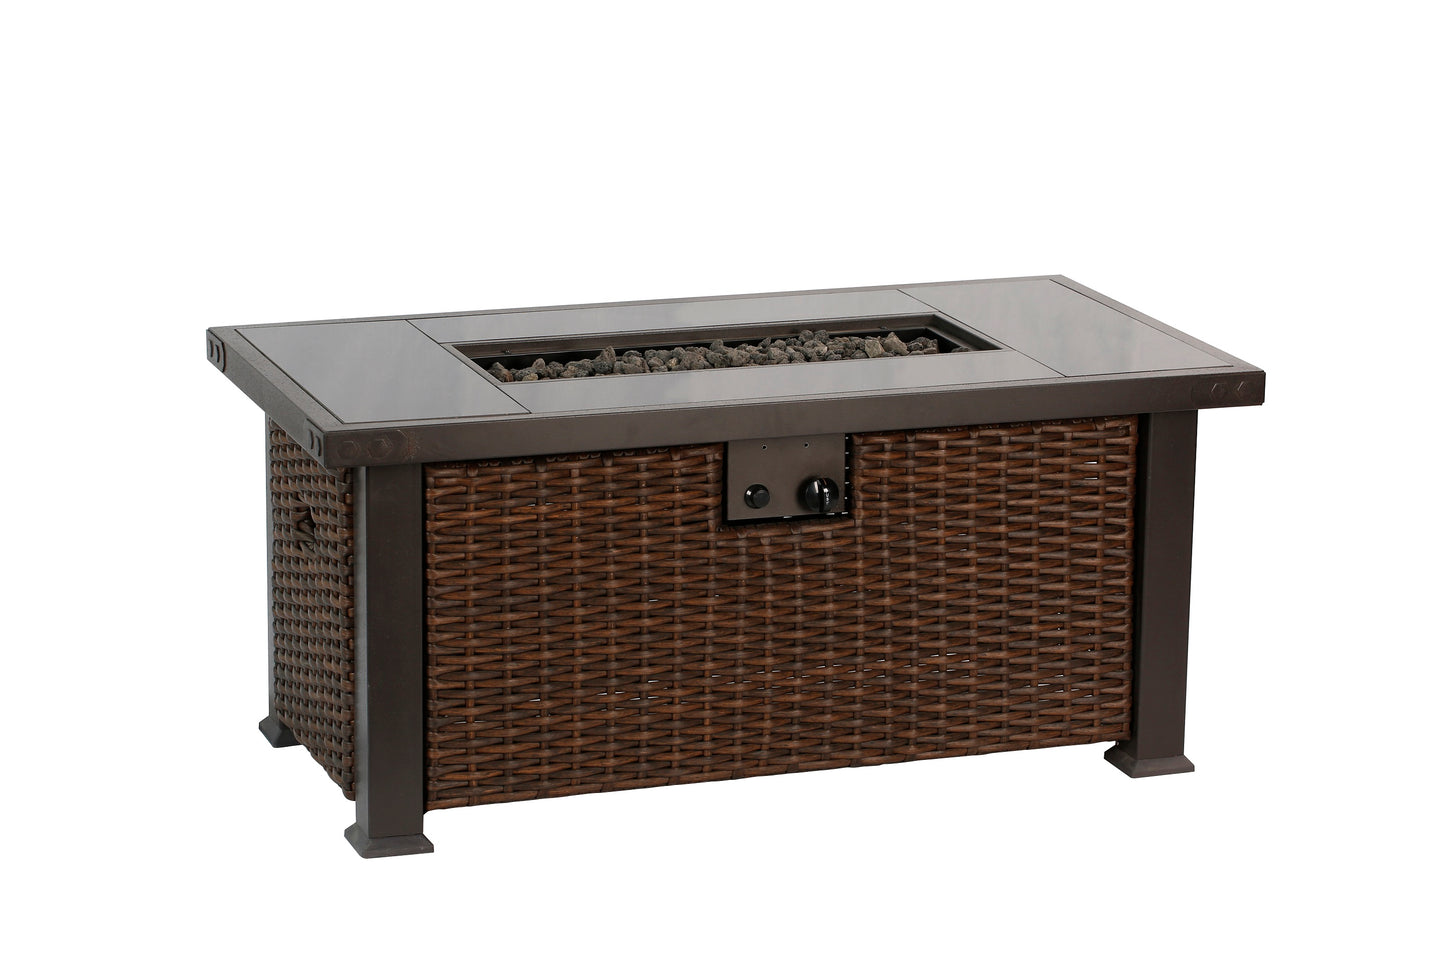 52” Rectangular Gas Fire Pit Table